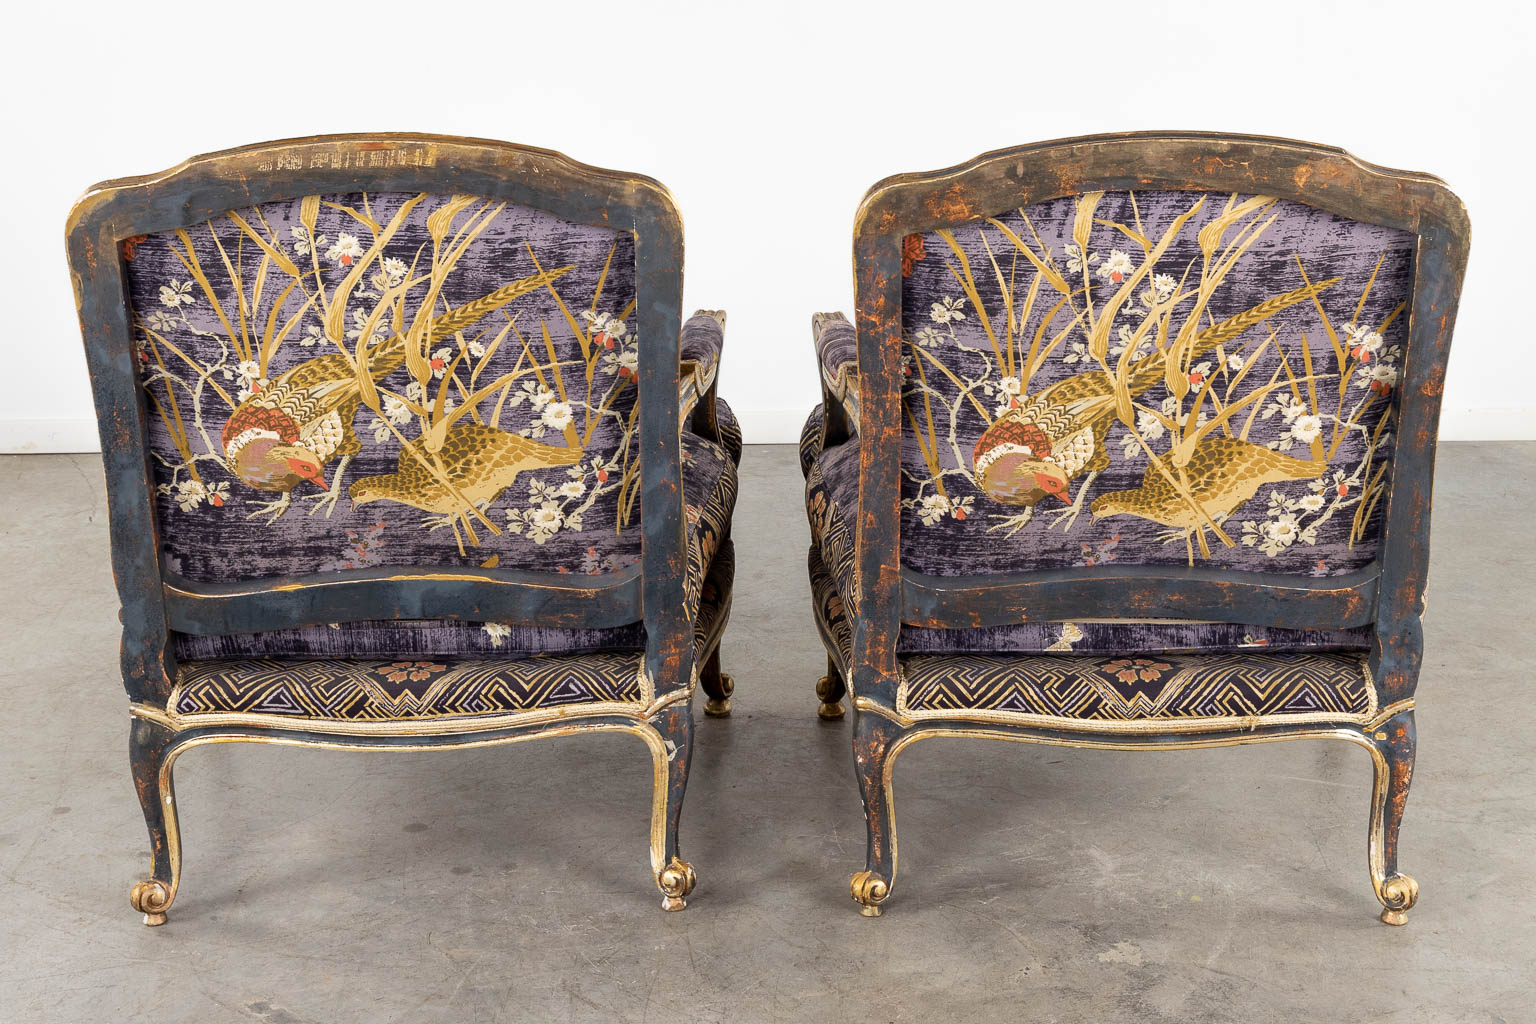 A pair of patinated Louis XV-style armchairs, fabric decorated with pheasants. (D:75 x W:75 x H:88 cm)